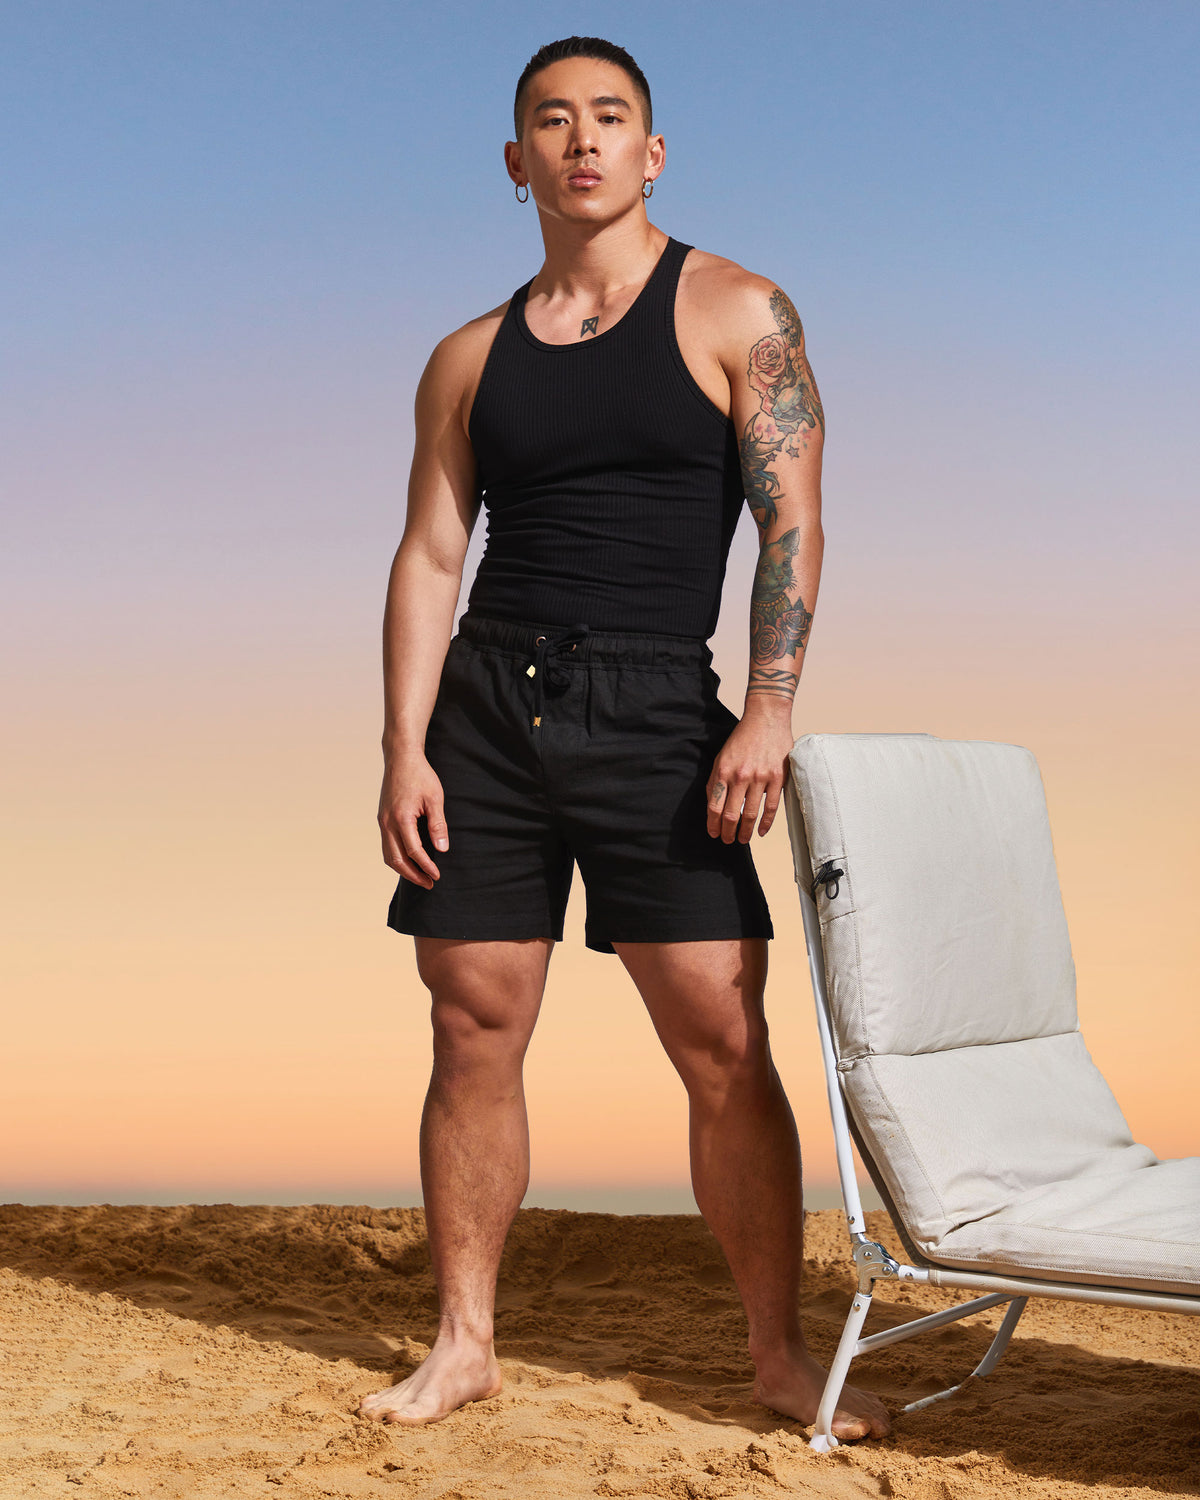 CODE22 Crochet Bundle - Men's Shorts & Top Knitted Outfit